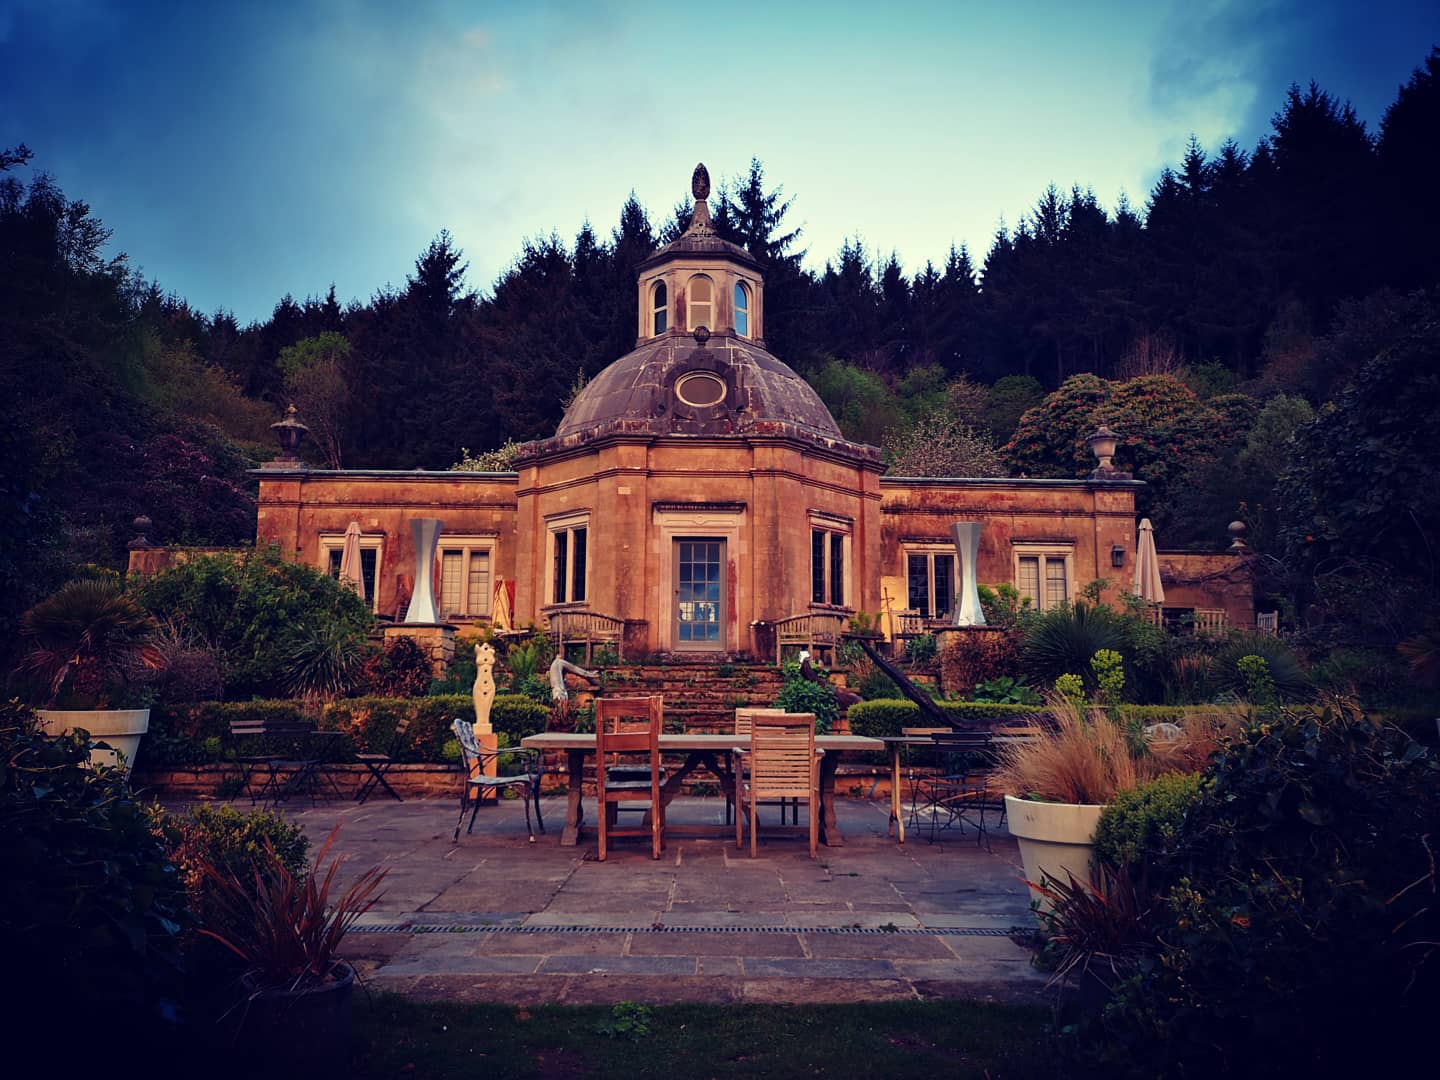 Image of the Orangery at Sunset